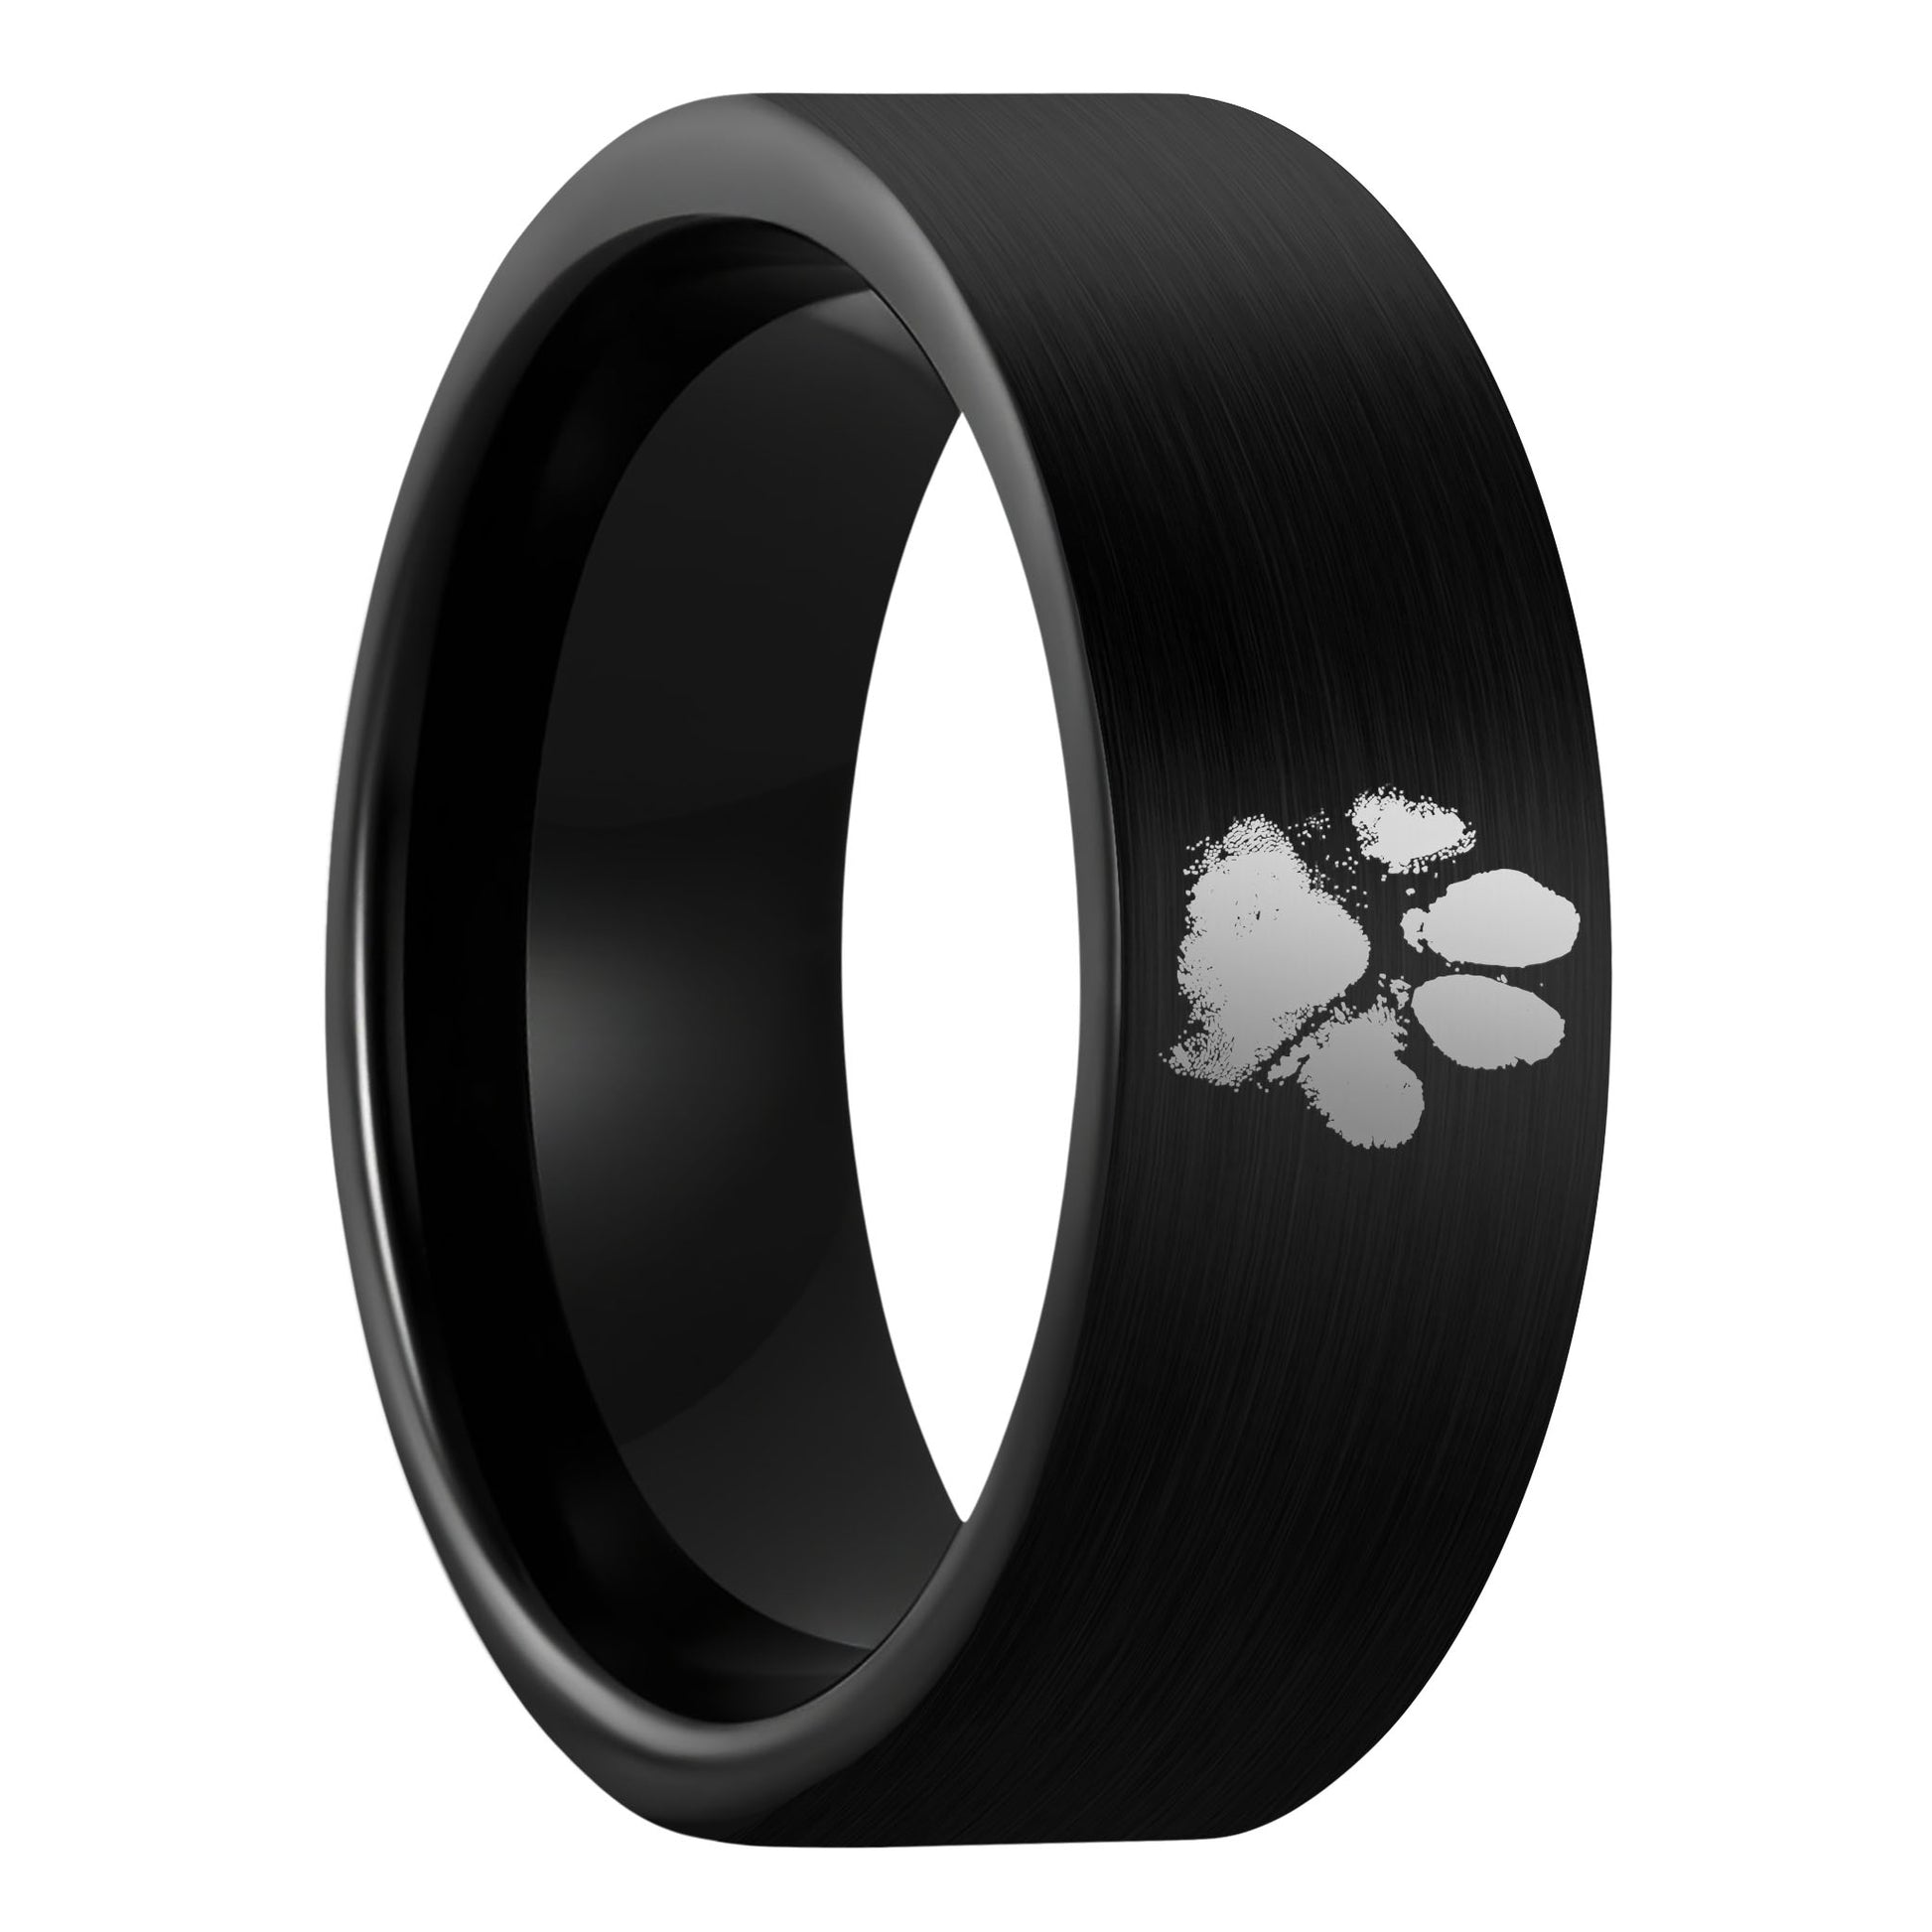 A custom paw print brushed black tungsten men's wedding band displayed on a plain white background.